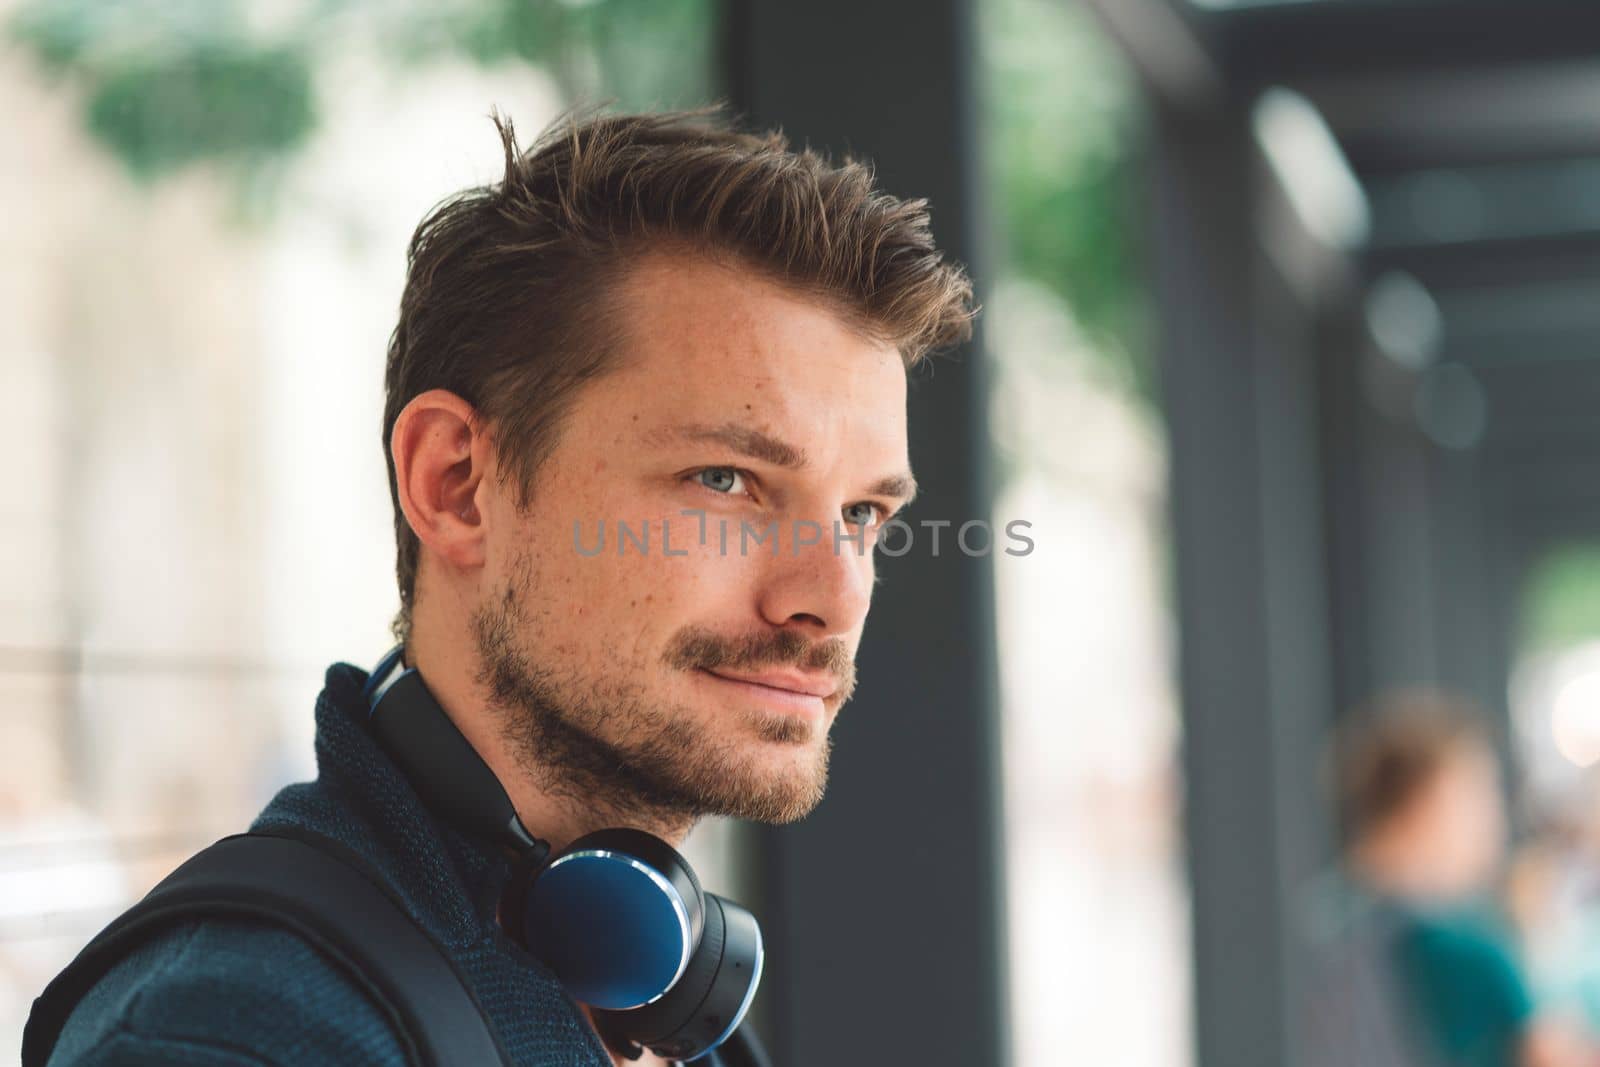 Portrait of a man with headphones around his neck waiting at the bus station by VisualProductions